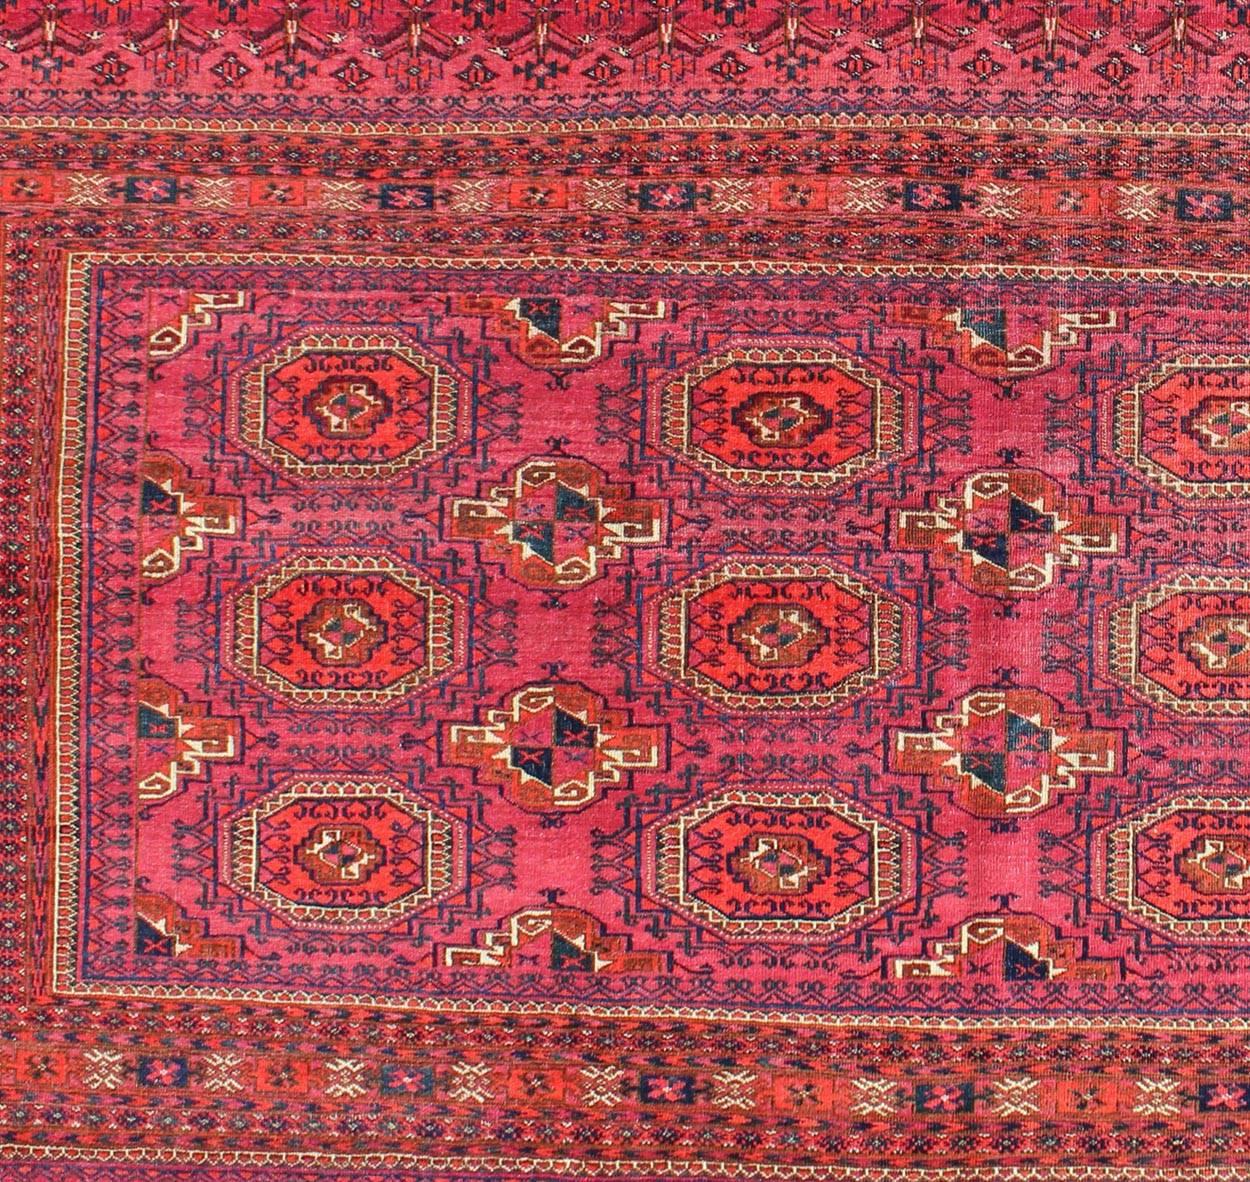 Tribal Antique Turkoman Tekke Rug with Repeating Medallion Design in Fuchsia